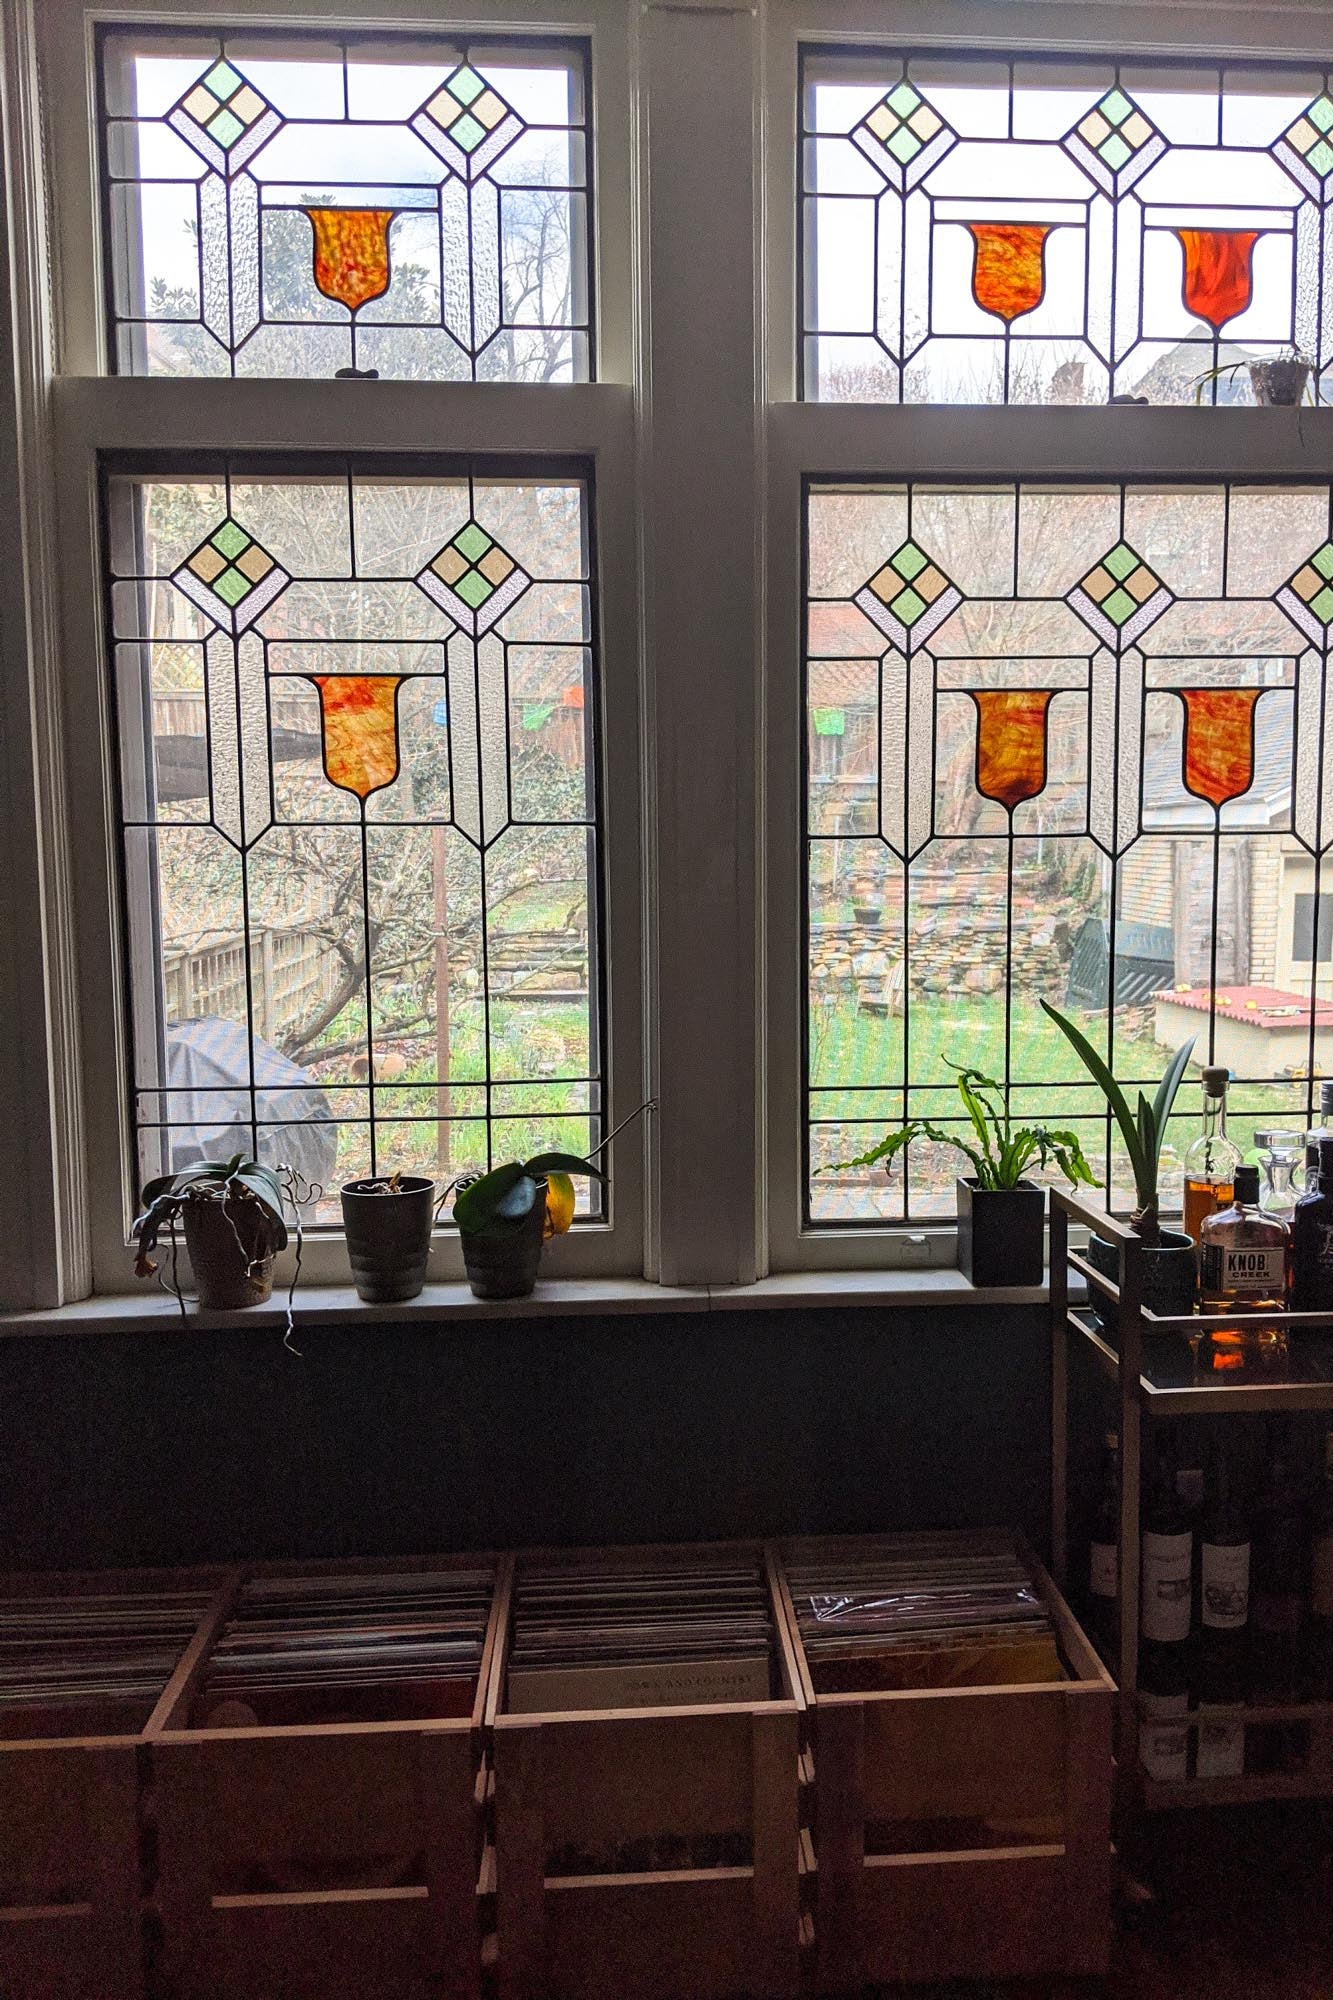 View from a stained glass window.